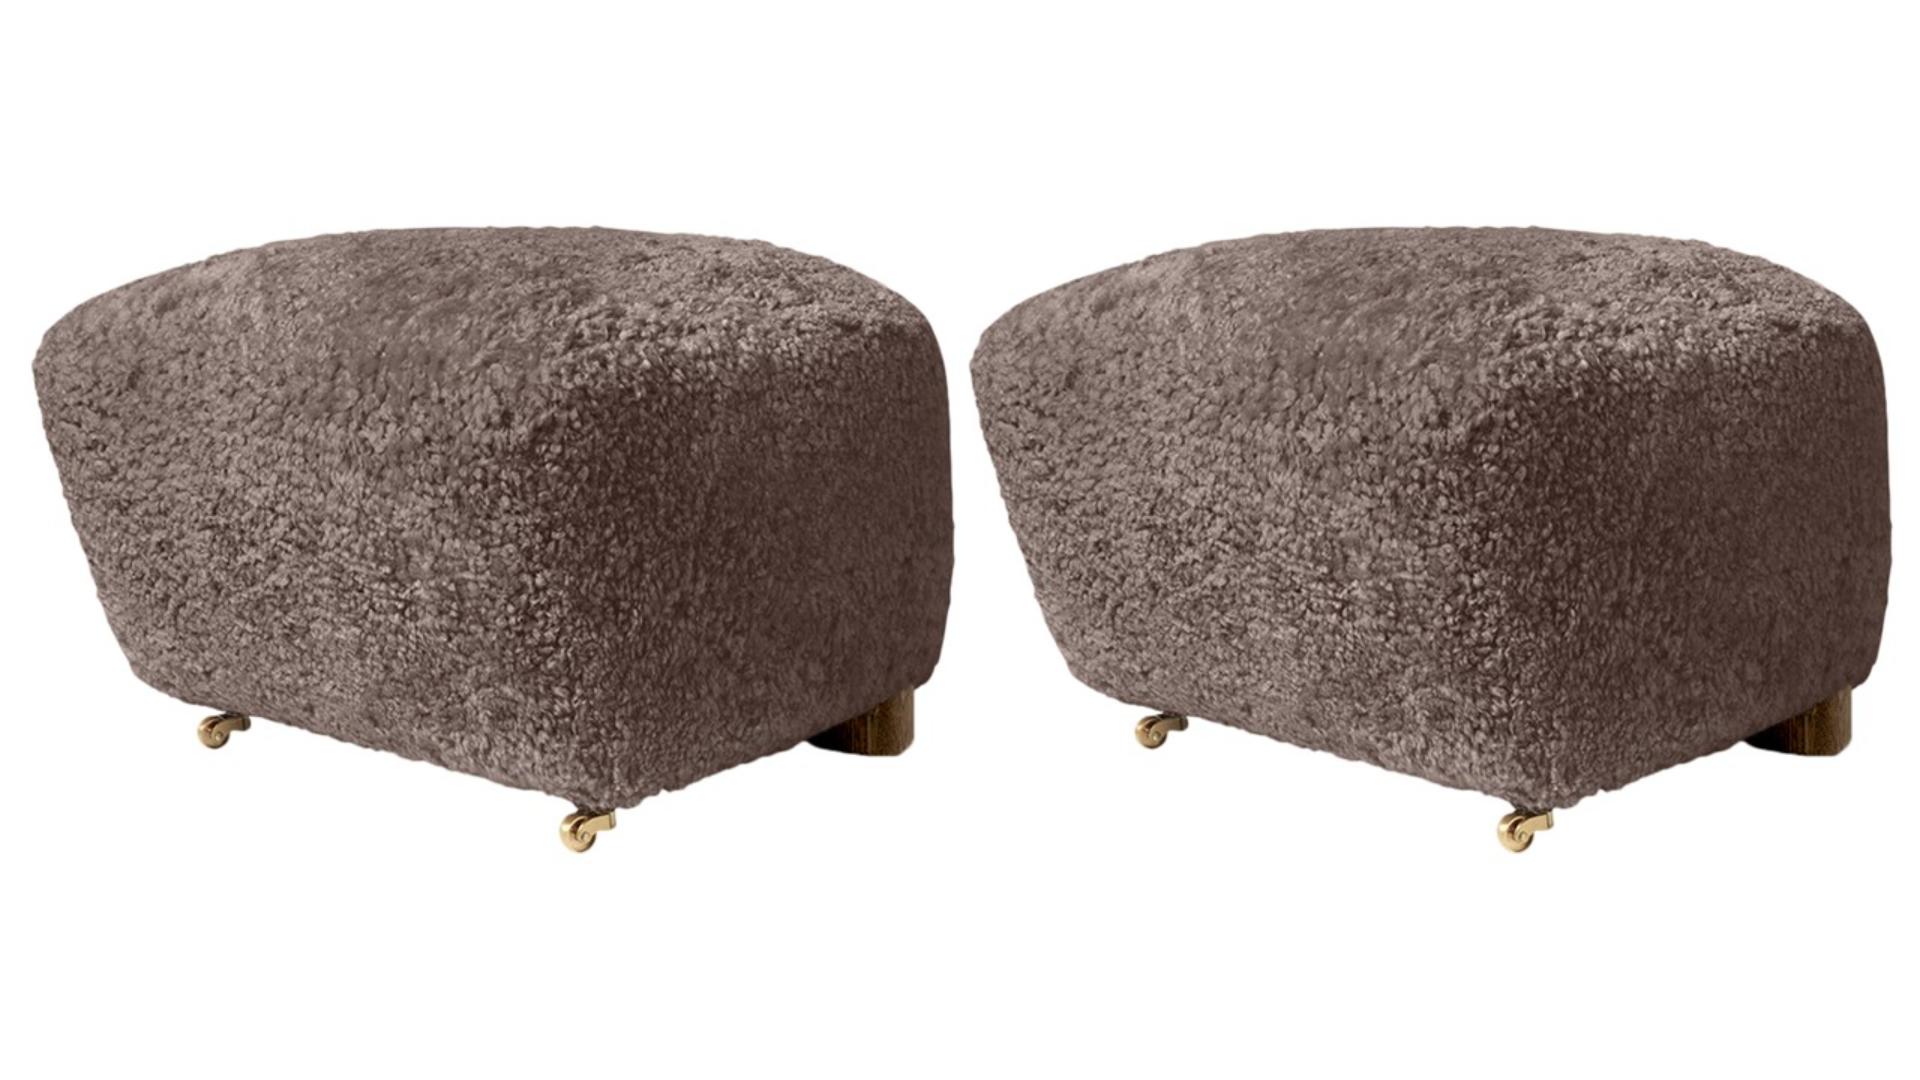 Set of 2 sahara smoked oak sheepskin the tired man footstools by Lassen
Dimensions: W 55 x D 53 x H 36 cm 
Materials: Sheepskin

Flemming Lassen designed the overstuffed easy chair, the tired man, for The Copenhagen Cabinetmakers’ Guild